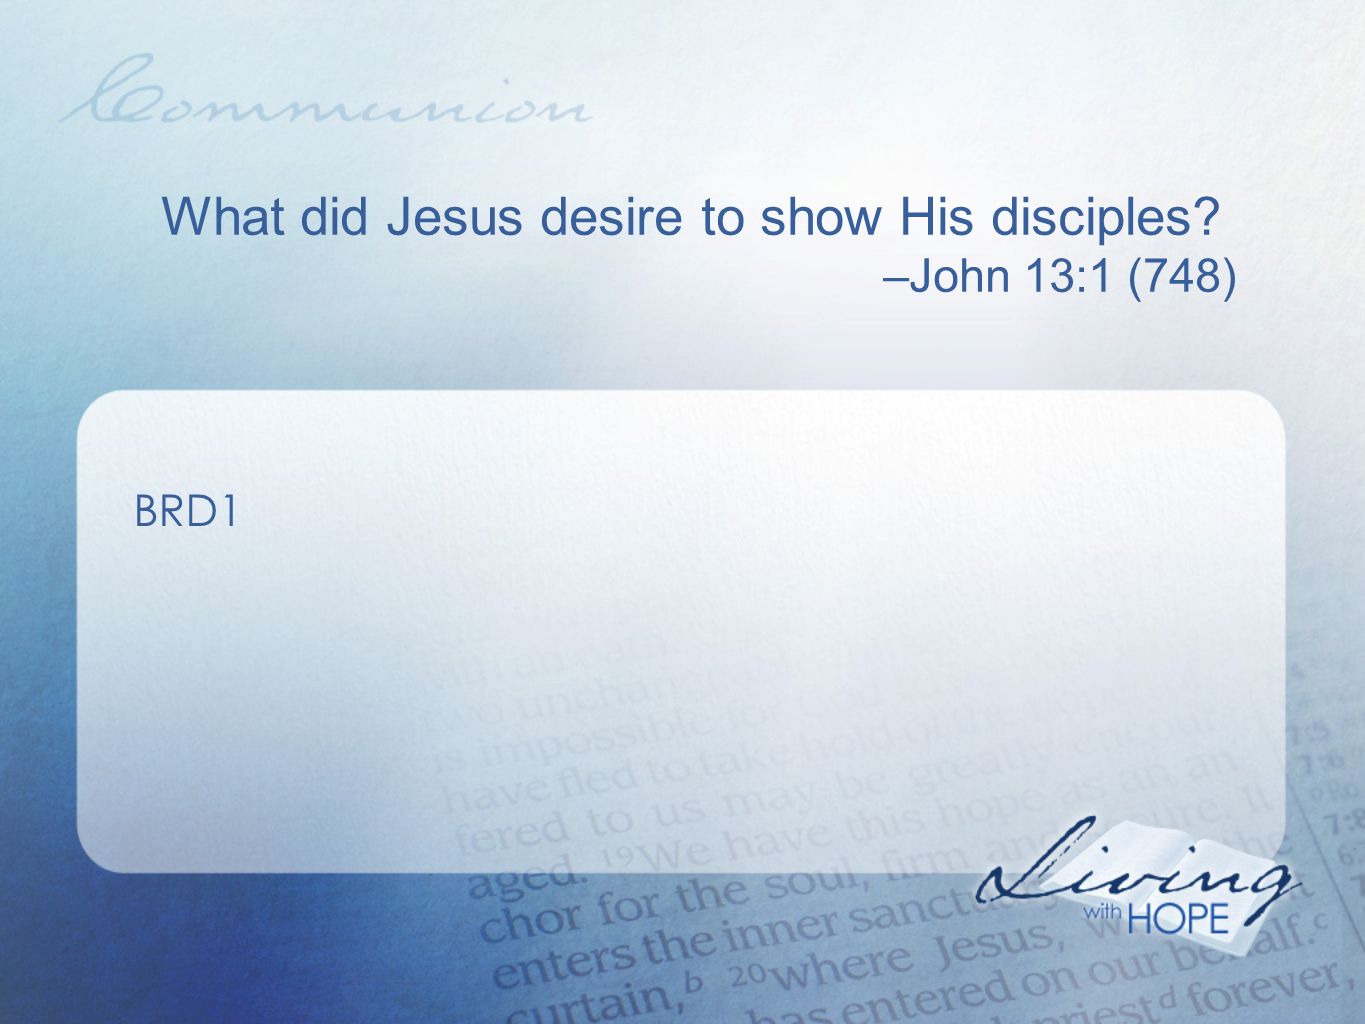 What did Jesus desire to show His disciples